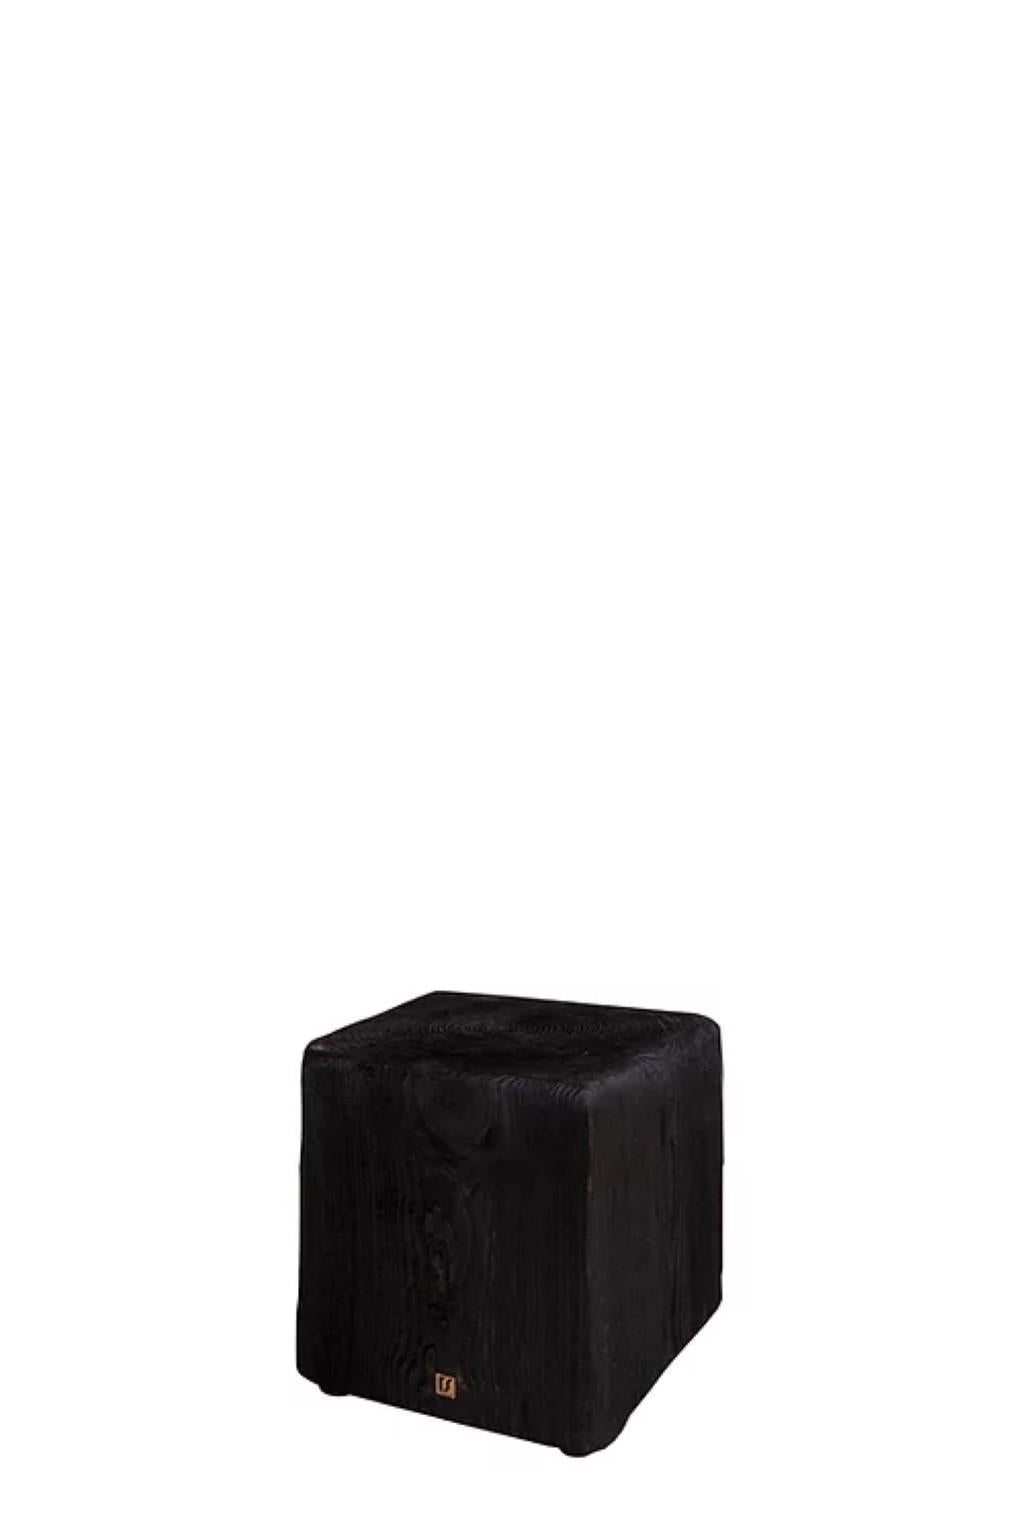 Essence S by Rectangle Studio
Dimensions: 25x25x25 cm
Materials: Solid Pine, Natural Black Wood oil 

Kabuk is an alternative product with sculptural appearance which can be used as a coffee table and a bedside table with its modern